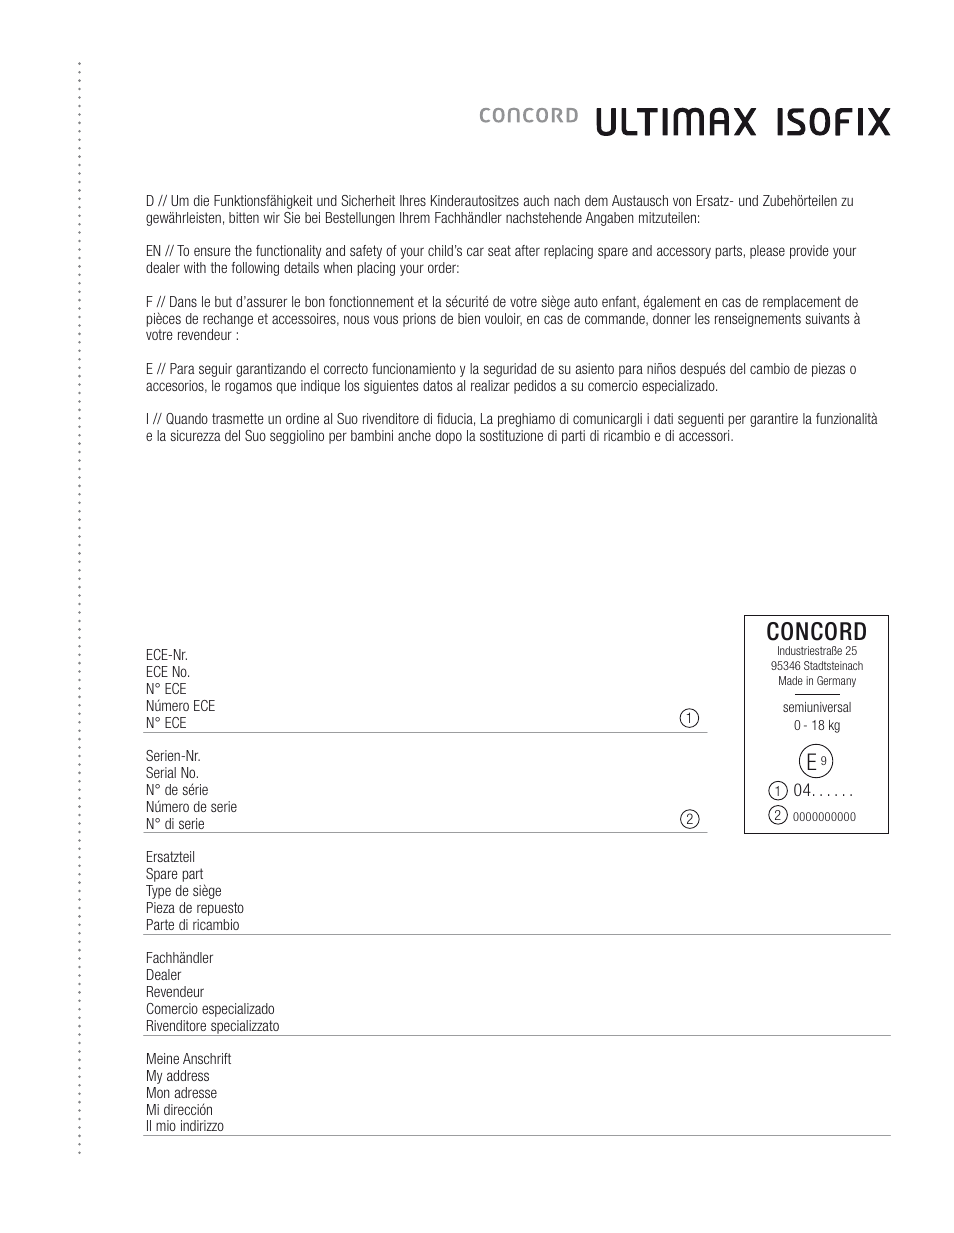 Concord | Concord ULTIMAX ISOFIX INSTRUCTION MANUAL User Manual | Page 13 /  14 | Original mode